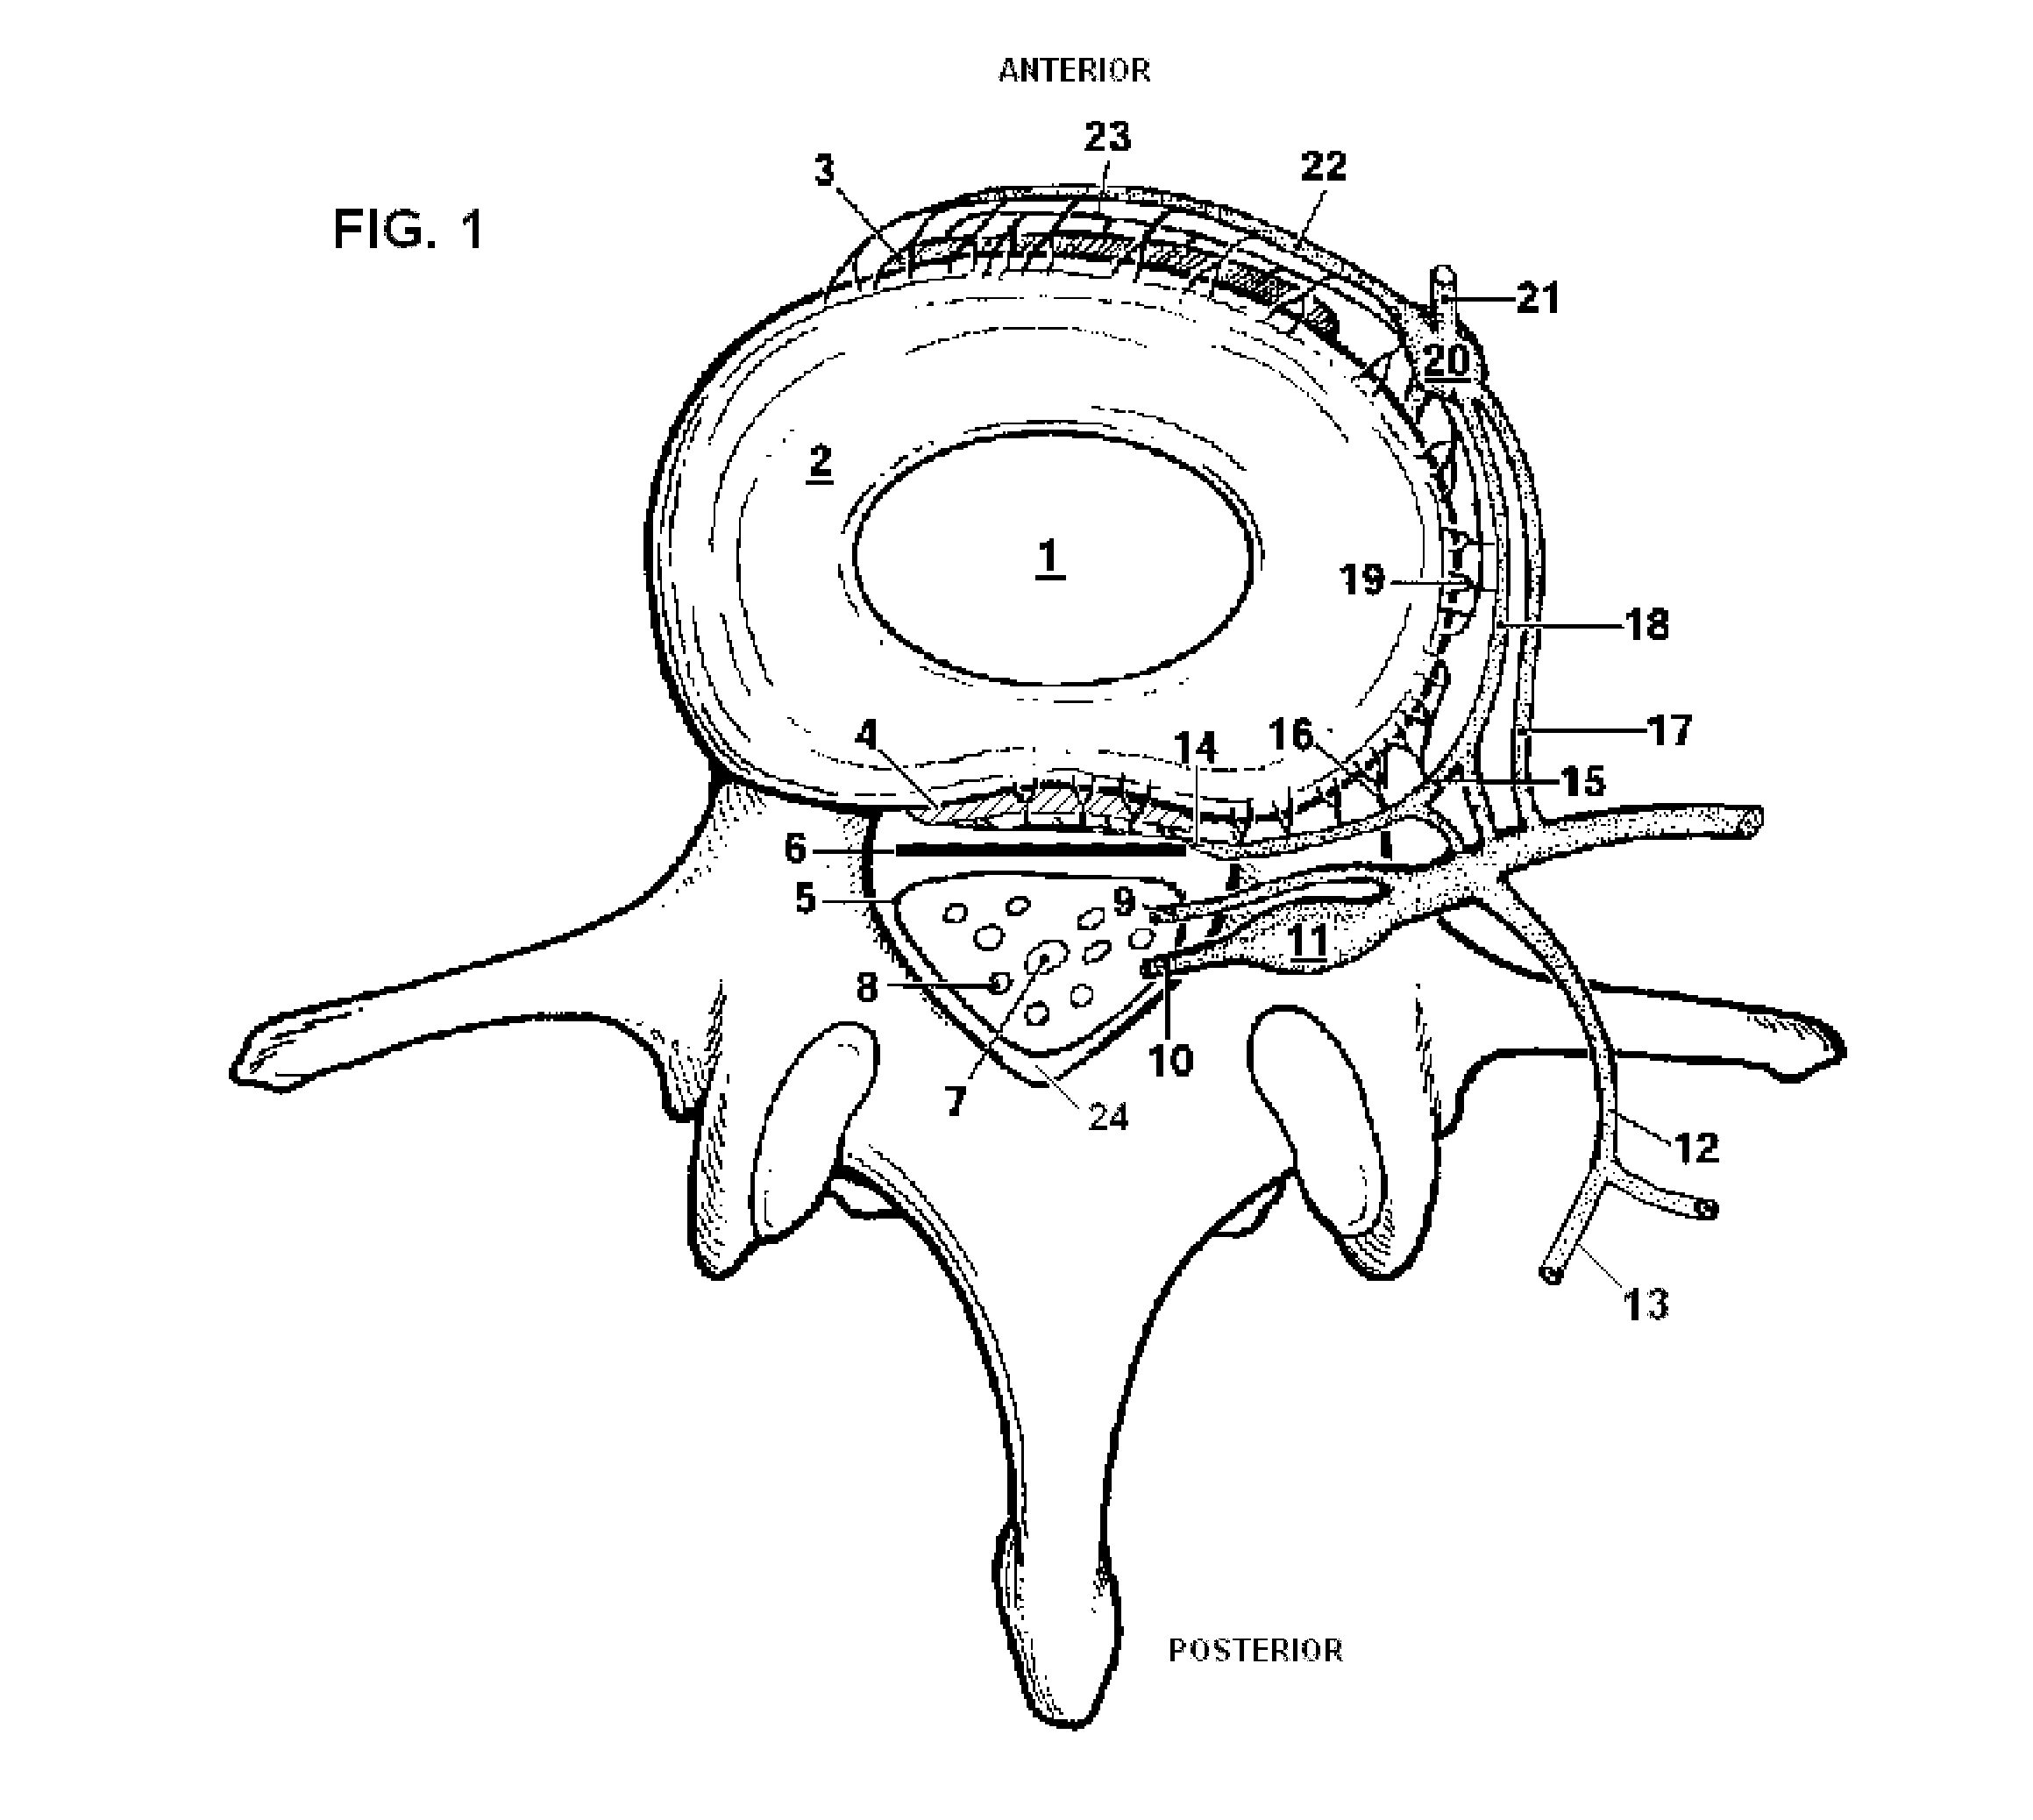 System and Methods for Diagnosis and Treatment of Discogenic Lower Back Pain